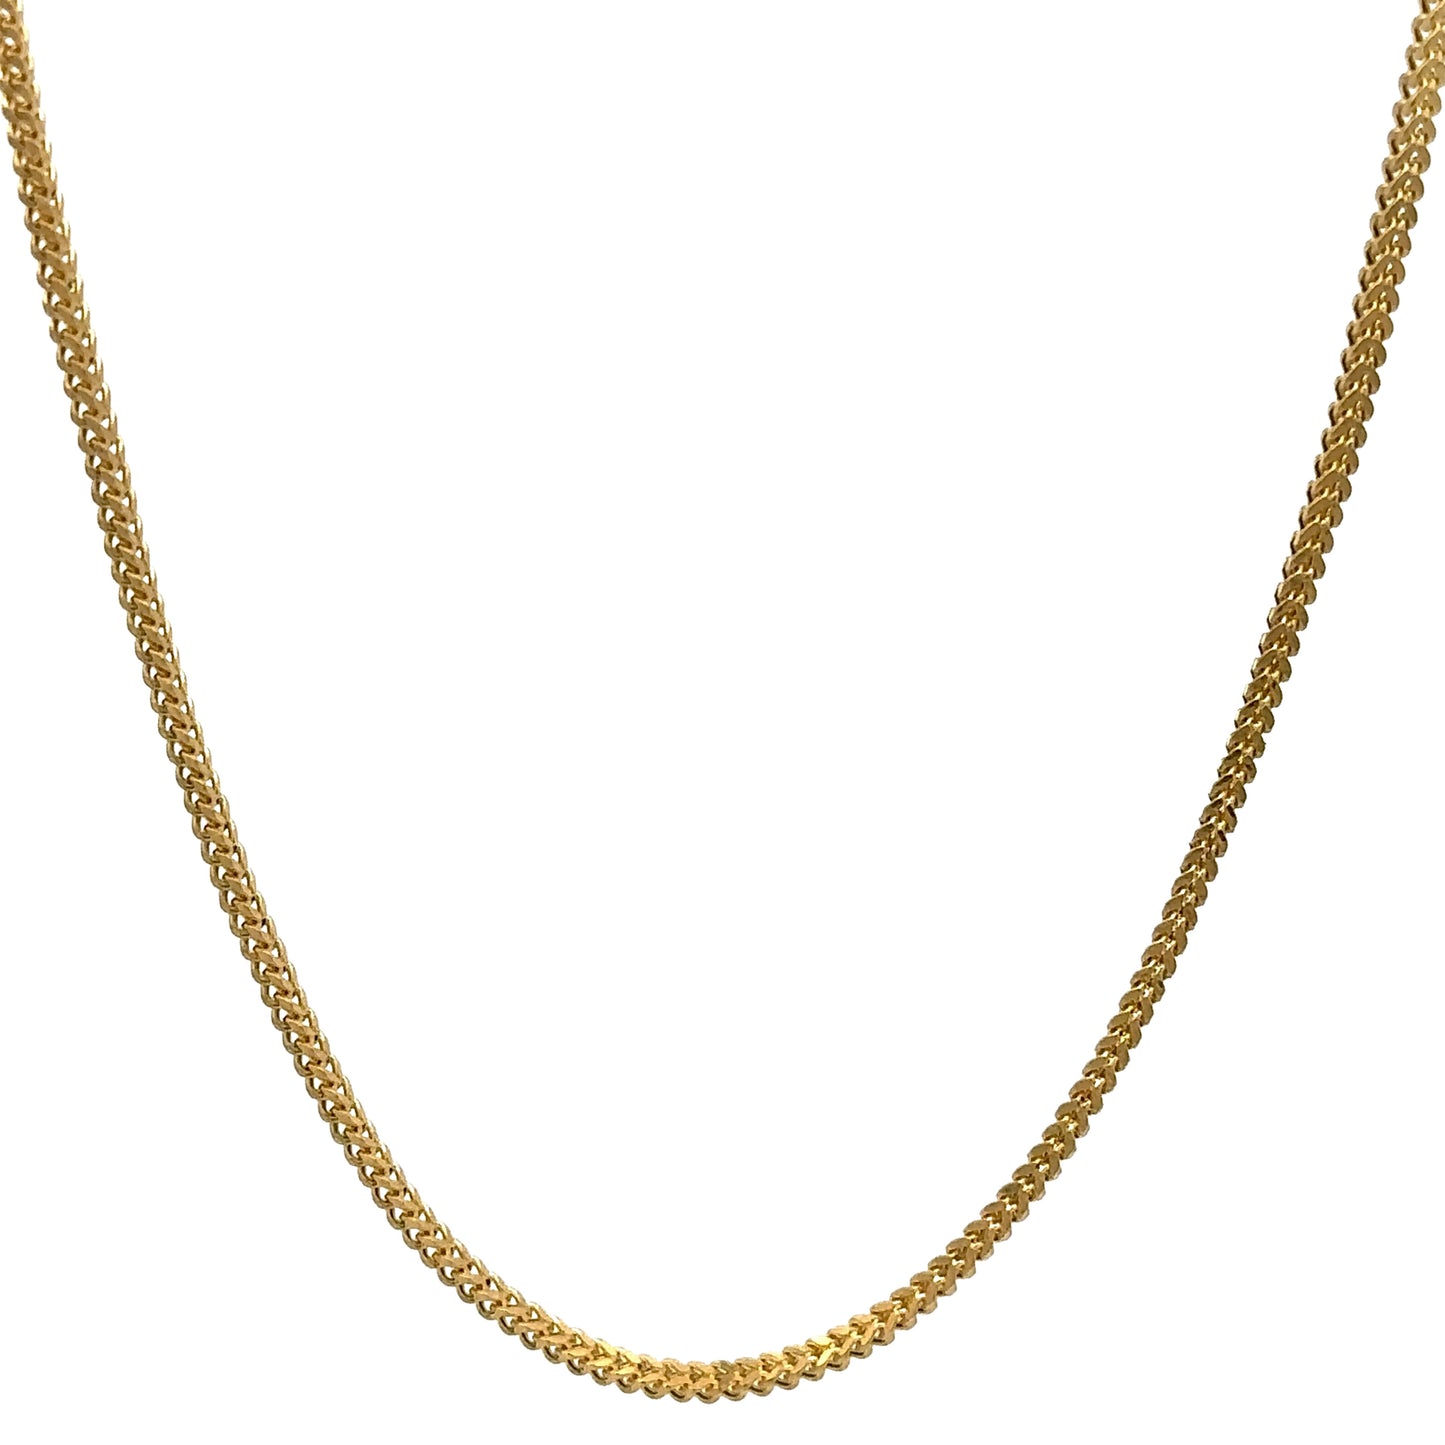 Hanging square yellow gold franco chain